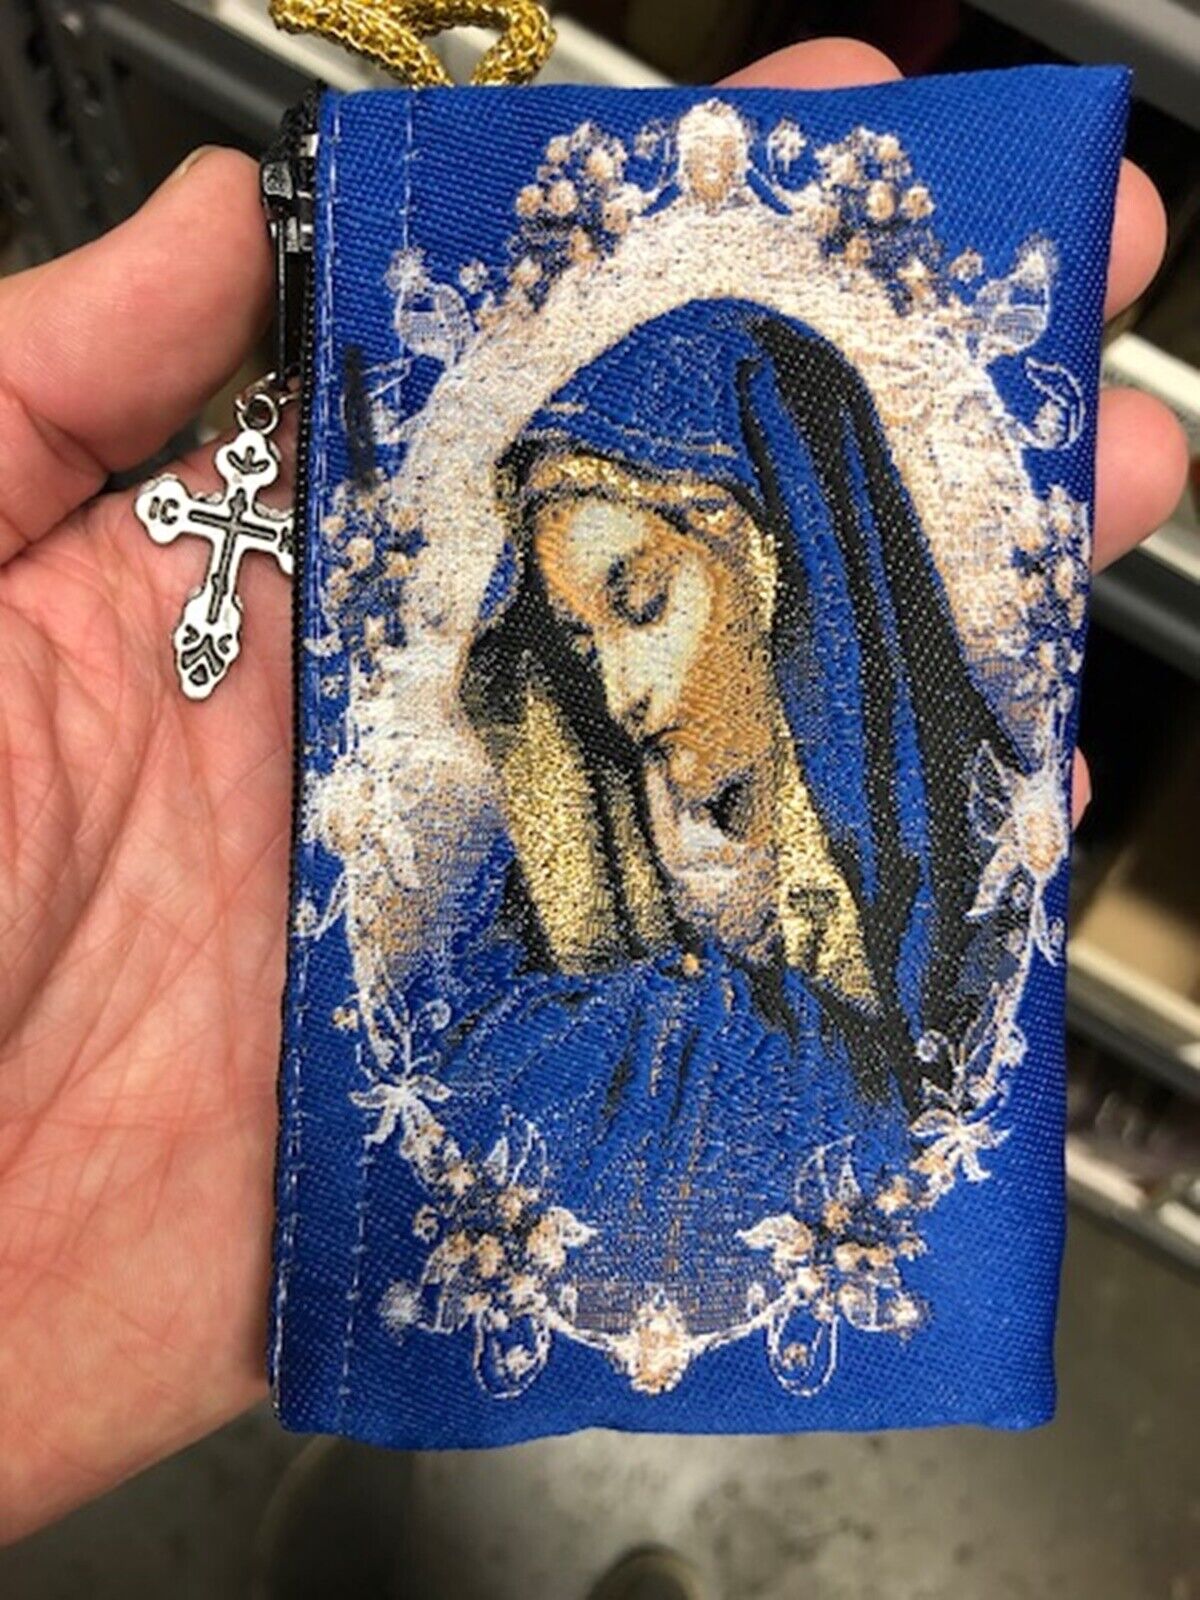 N.G. Our Lady of Sorrows Virgin Mary Icon Tapestry Cloth Rosary Pouch, 4.5 Inch